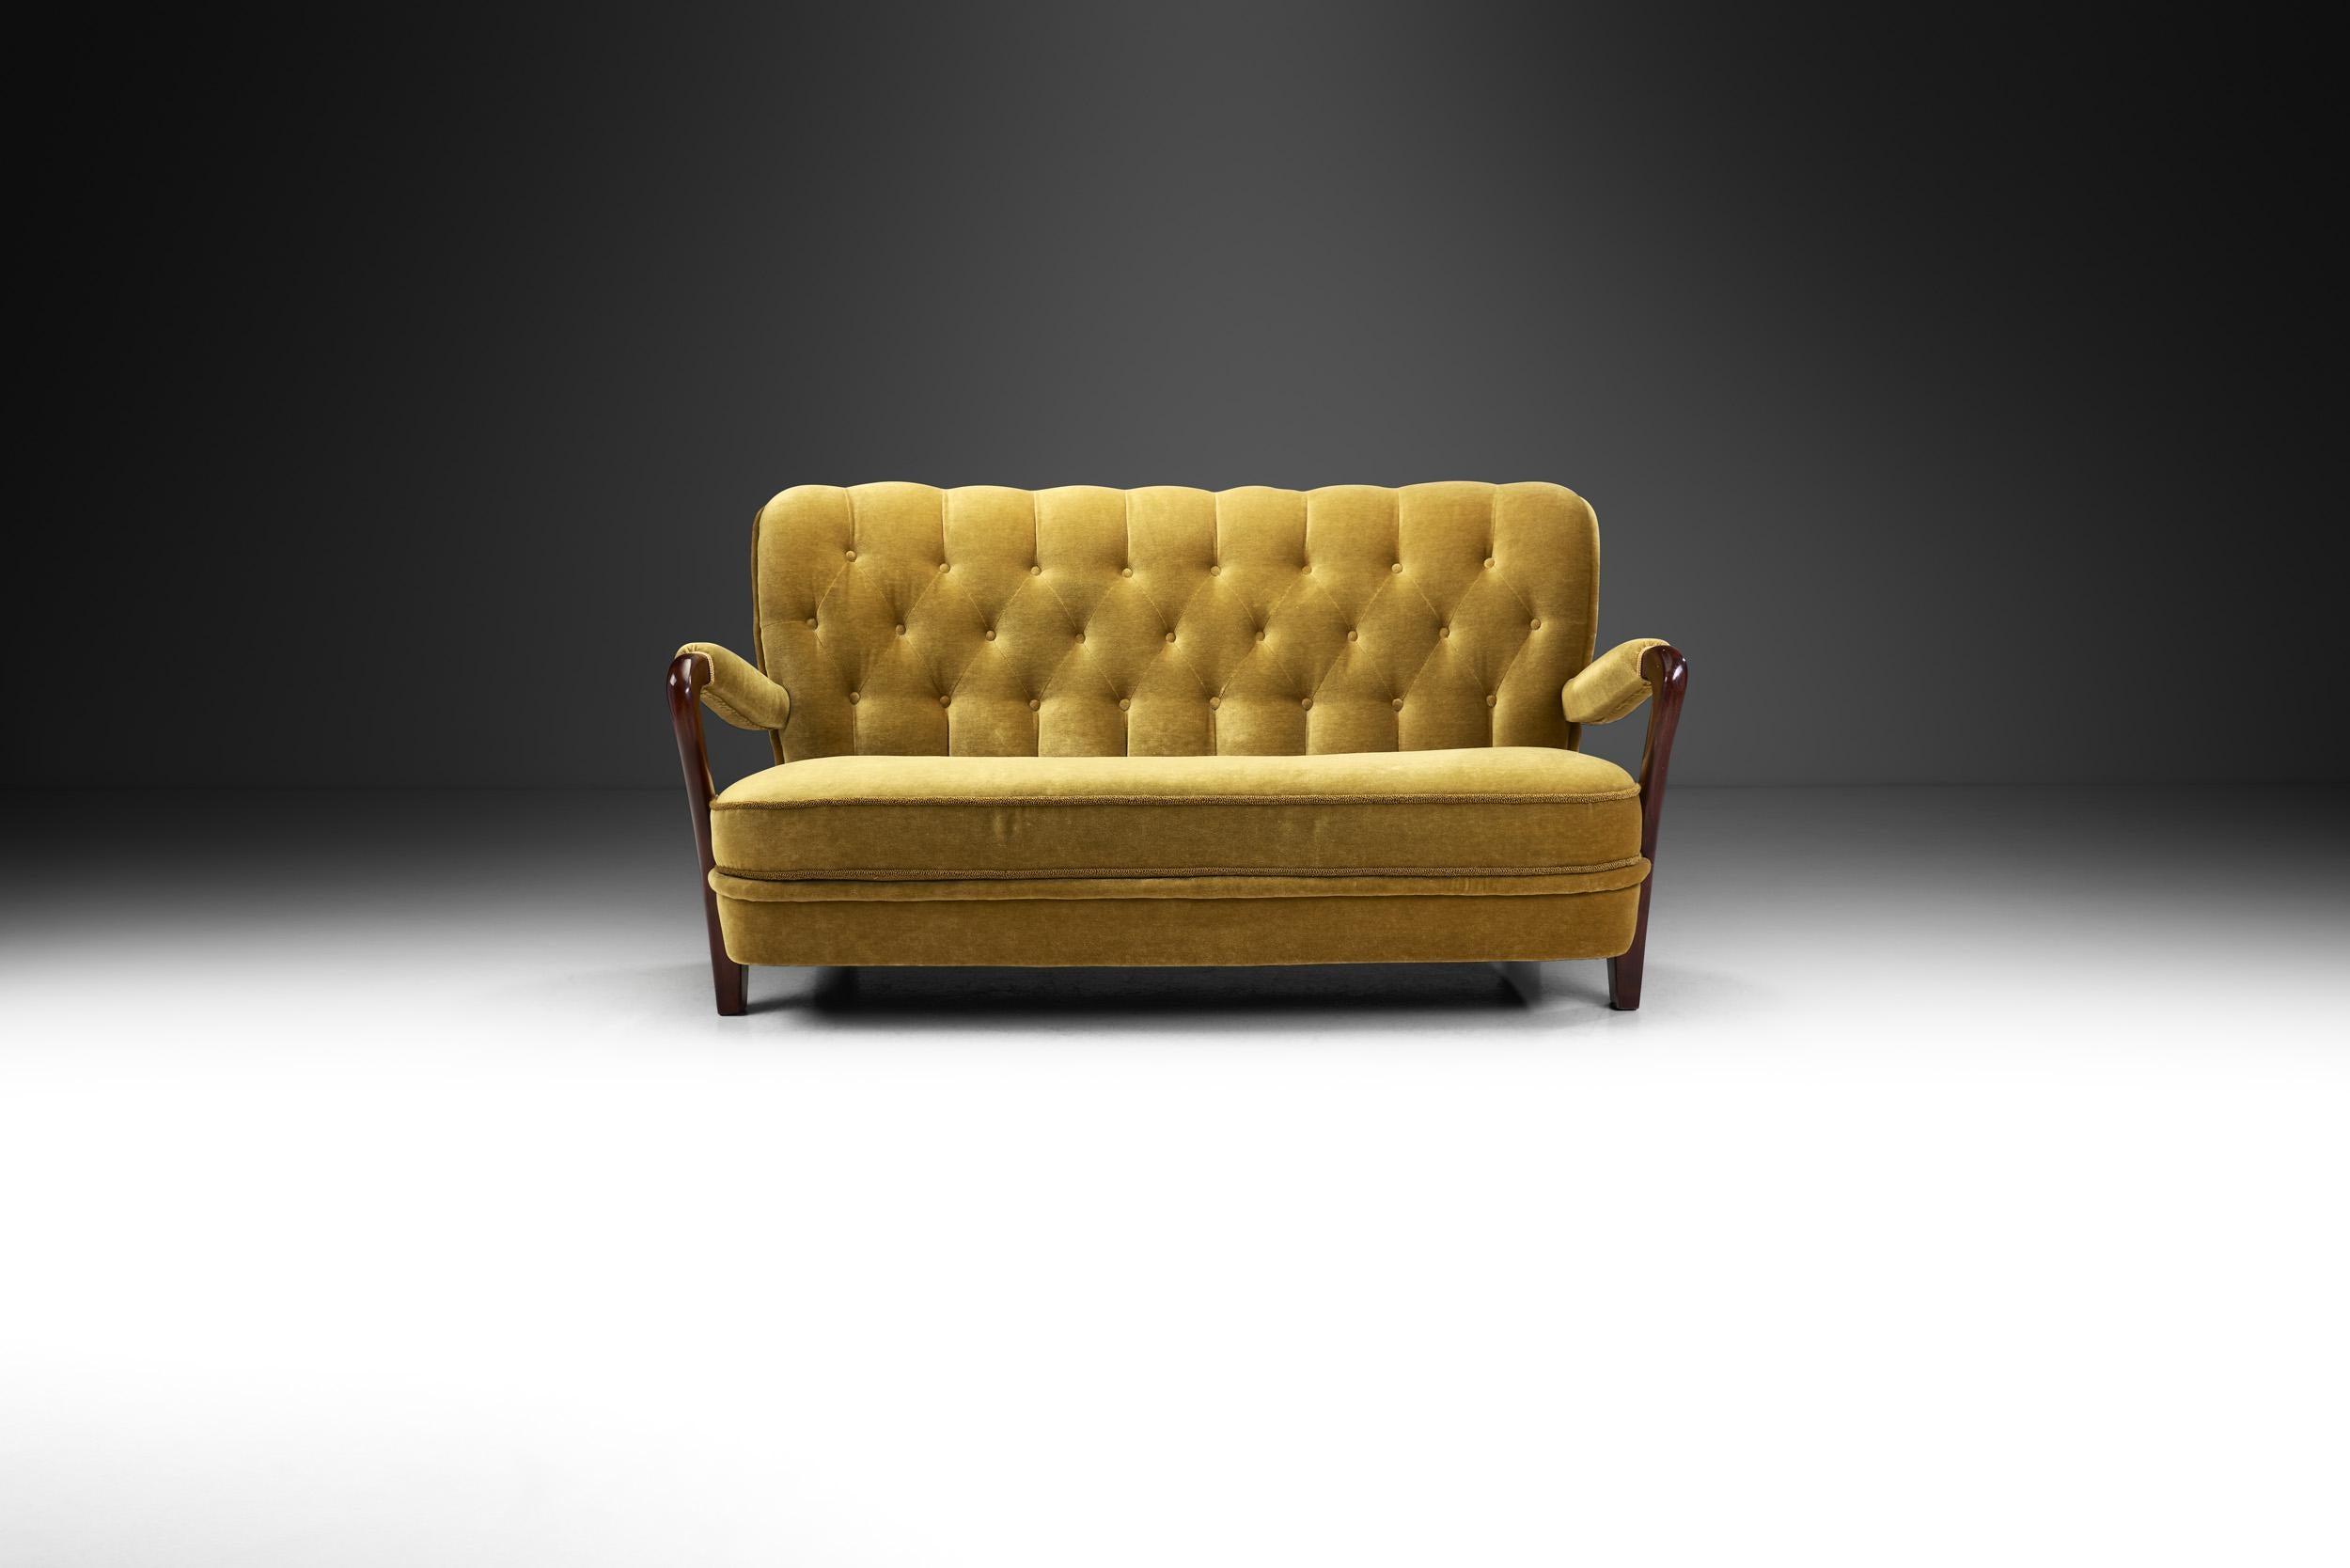 Mid-20th Century Swedish Modern Two-Seater Sofa, Sweden 1940s For Sale